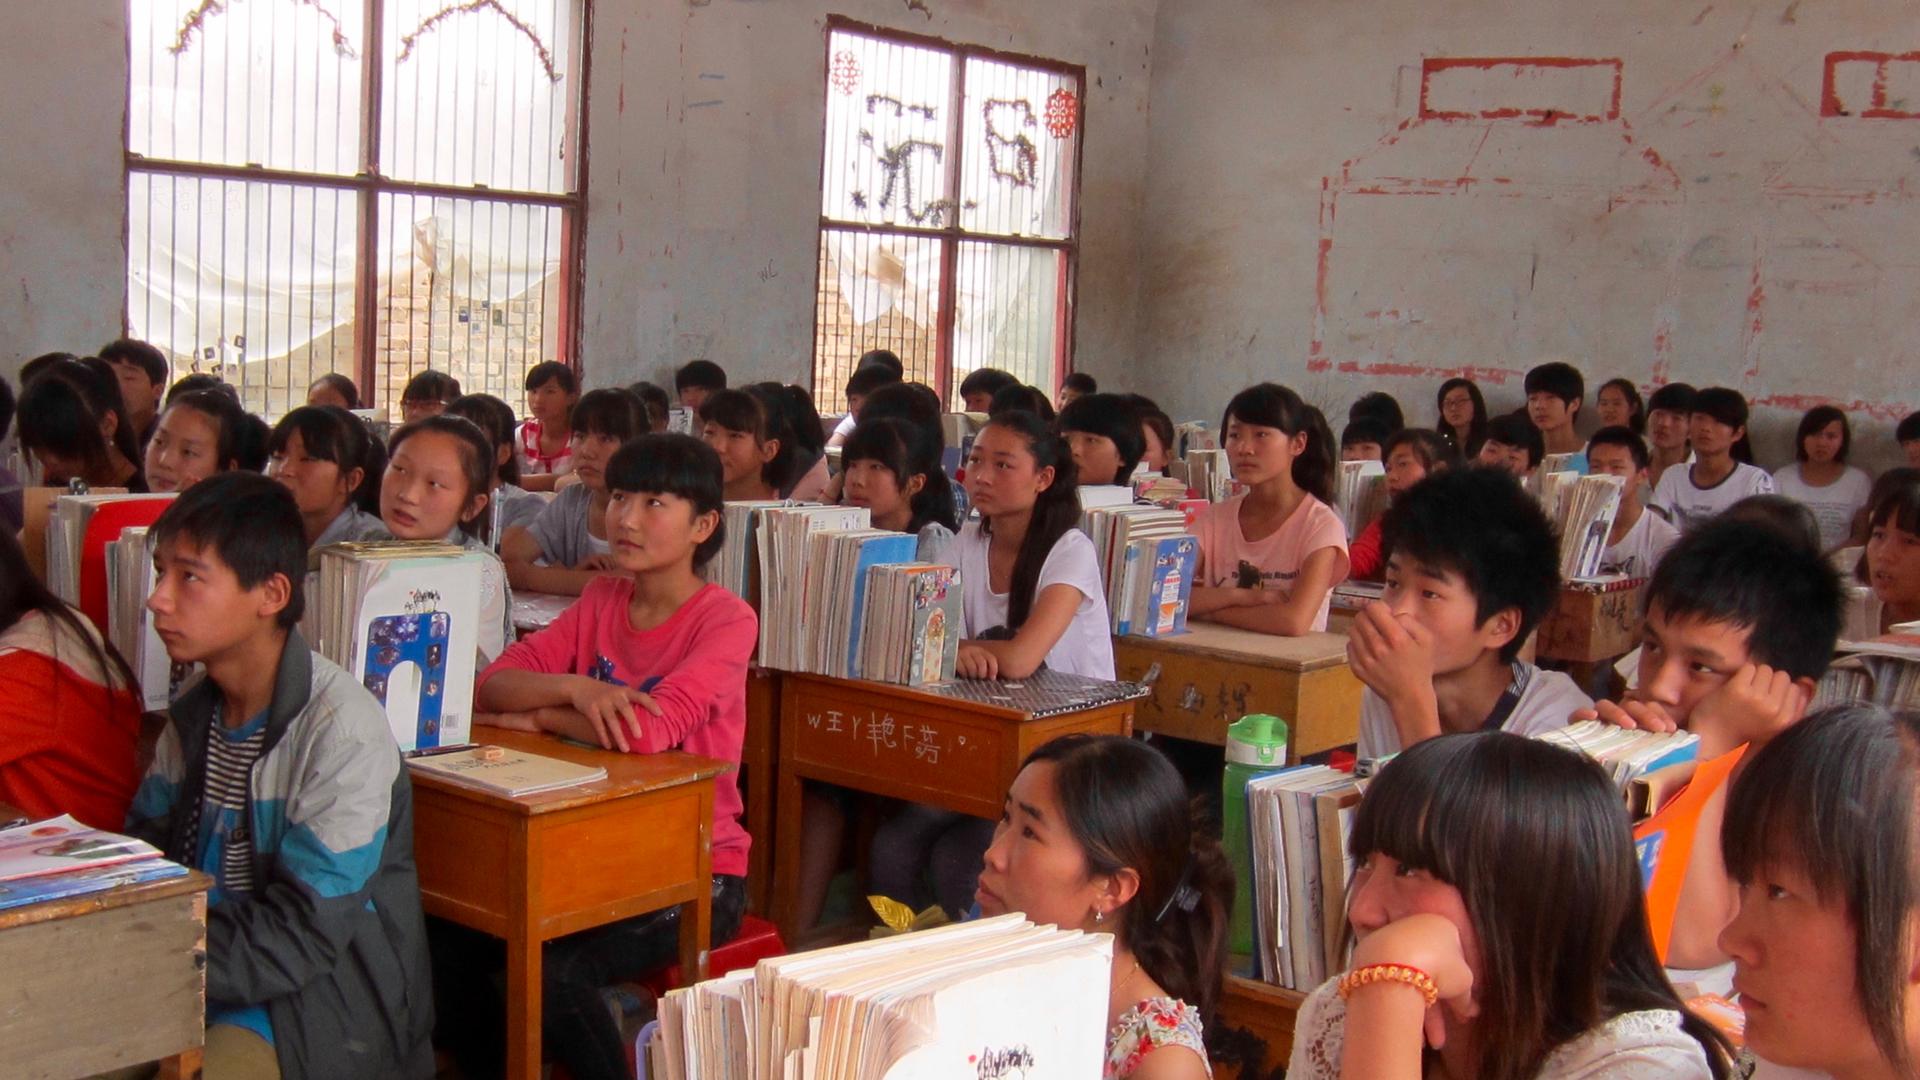 Students sit through class in a rural Chinese school. American writer Lenora Chu's new book is called "Little Soldiers: An American Boy, A Chinese School, and the Global Race to Achieve."